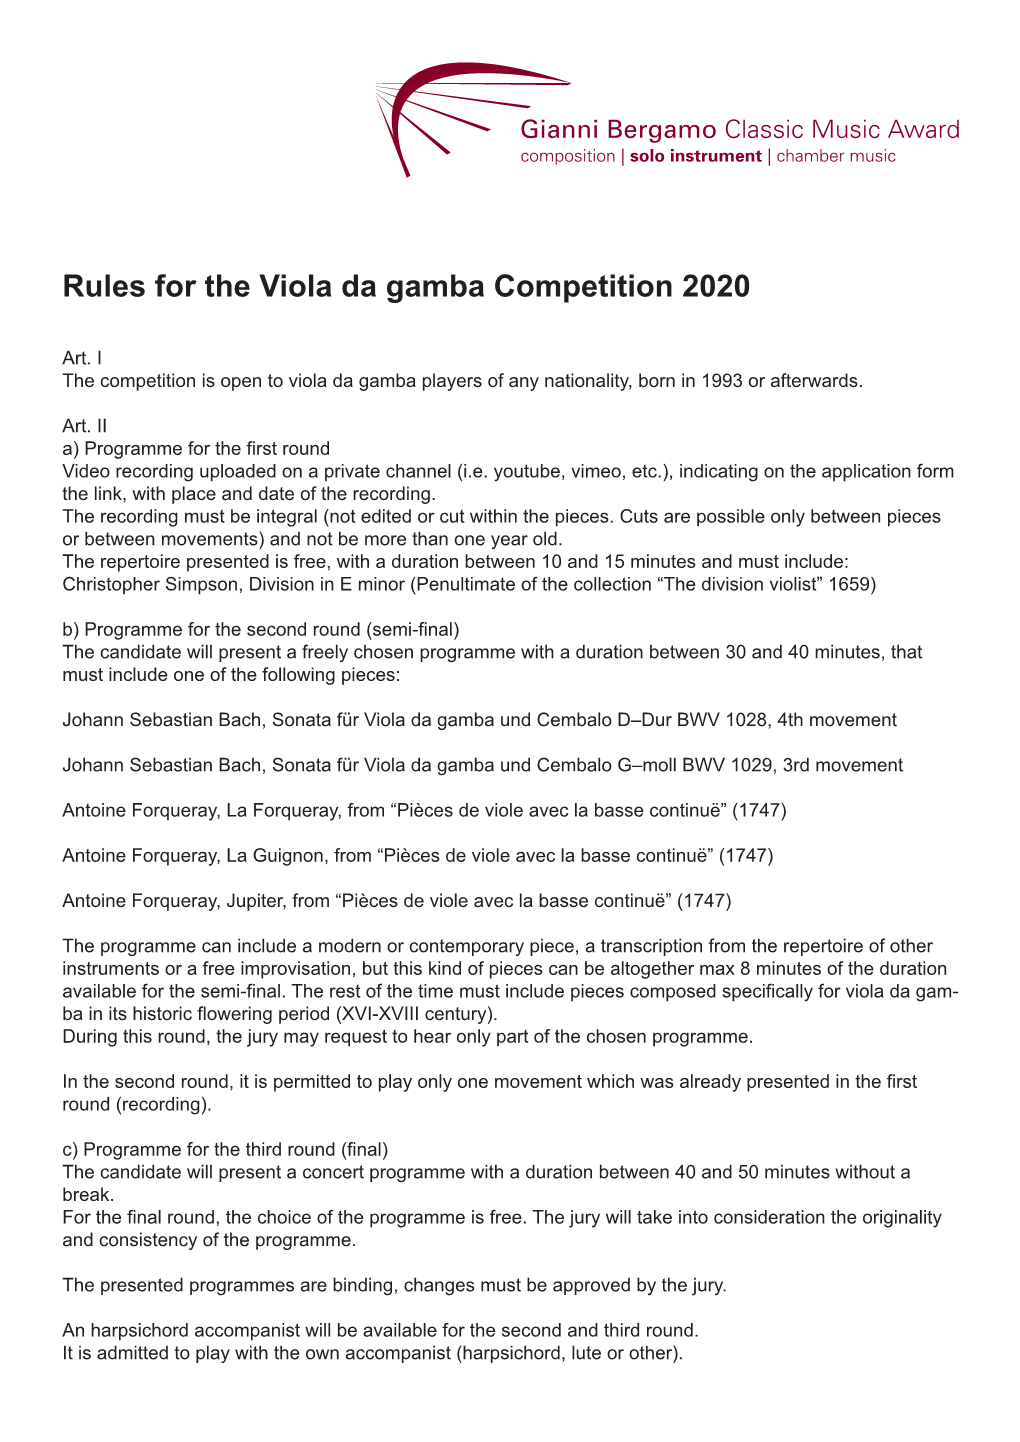 Rules for the Viola Da Gamba Competition 2020